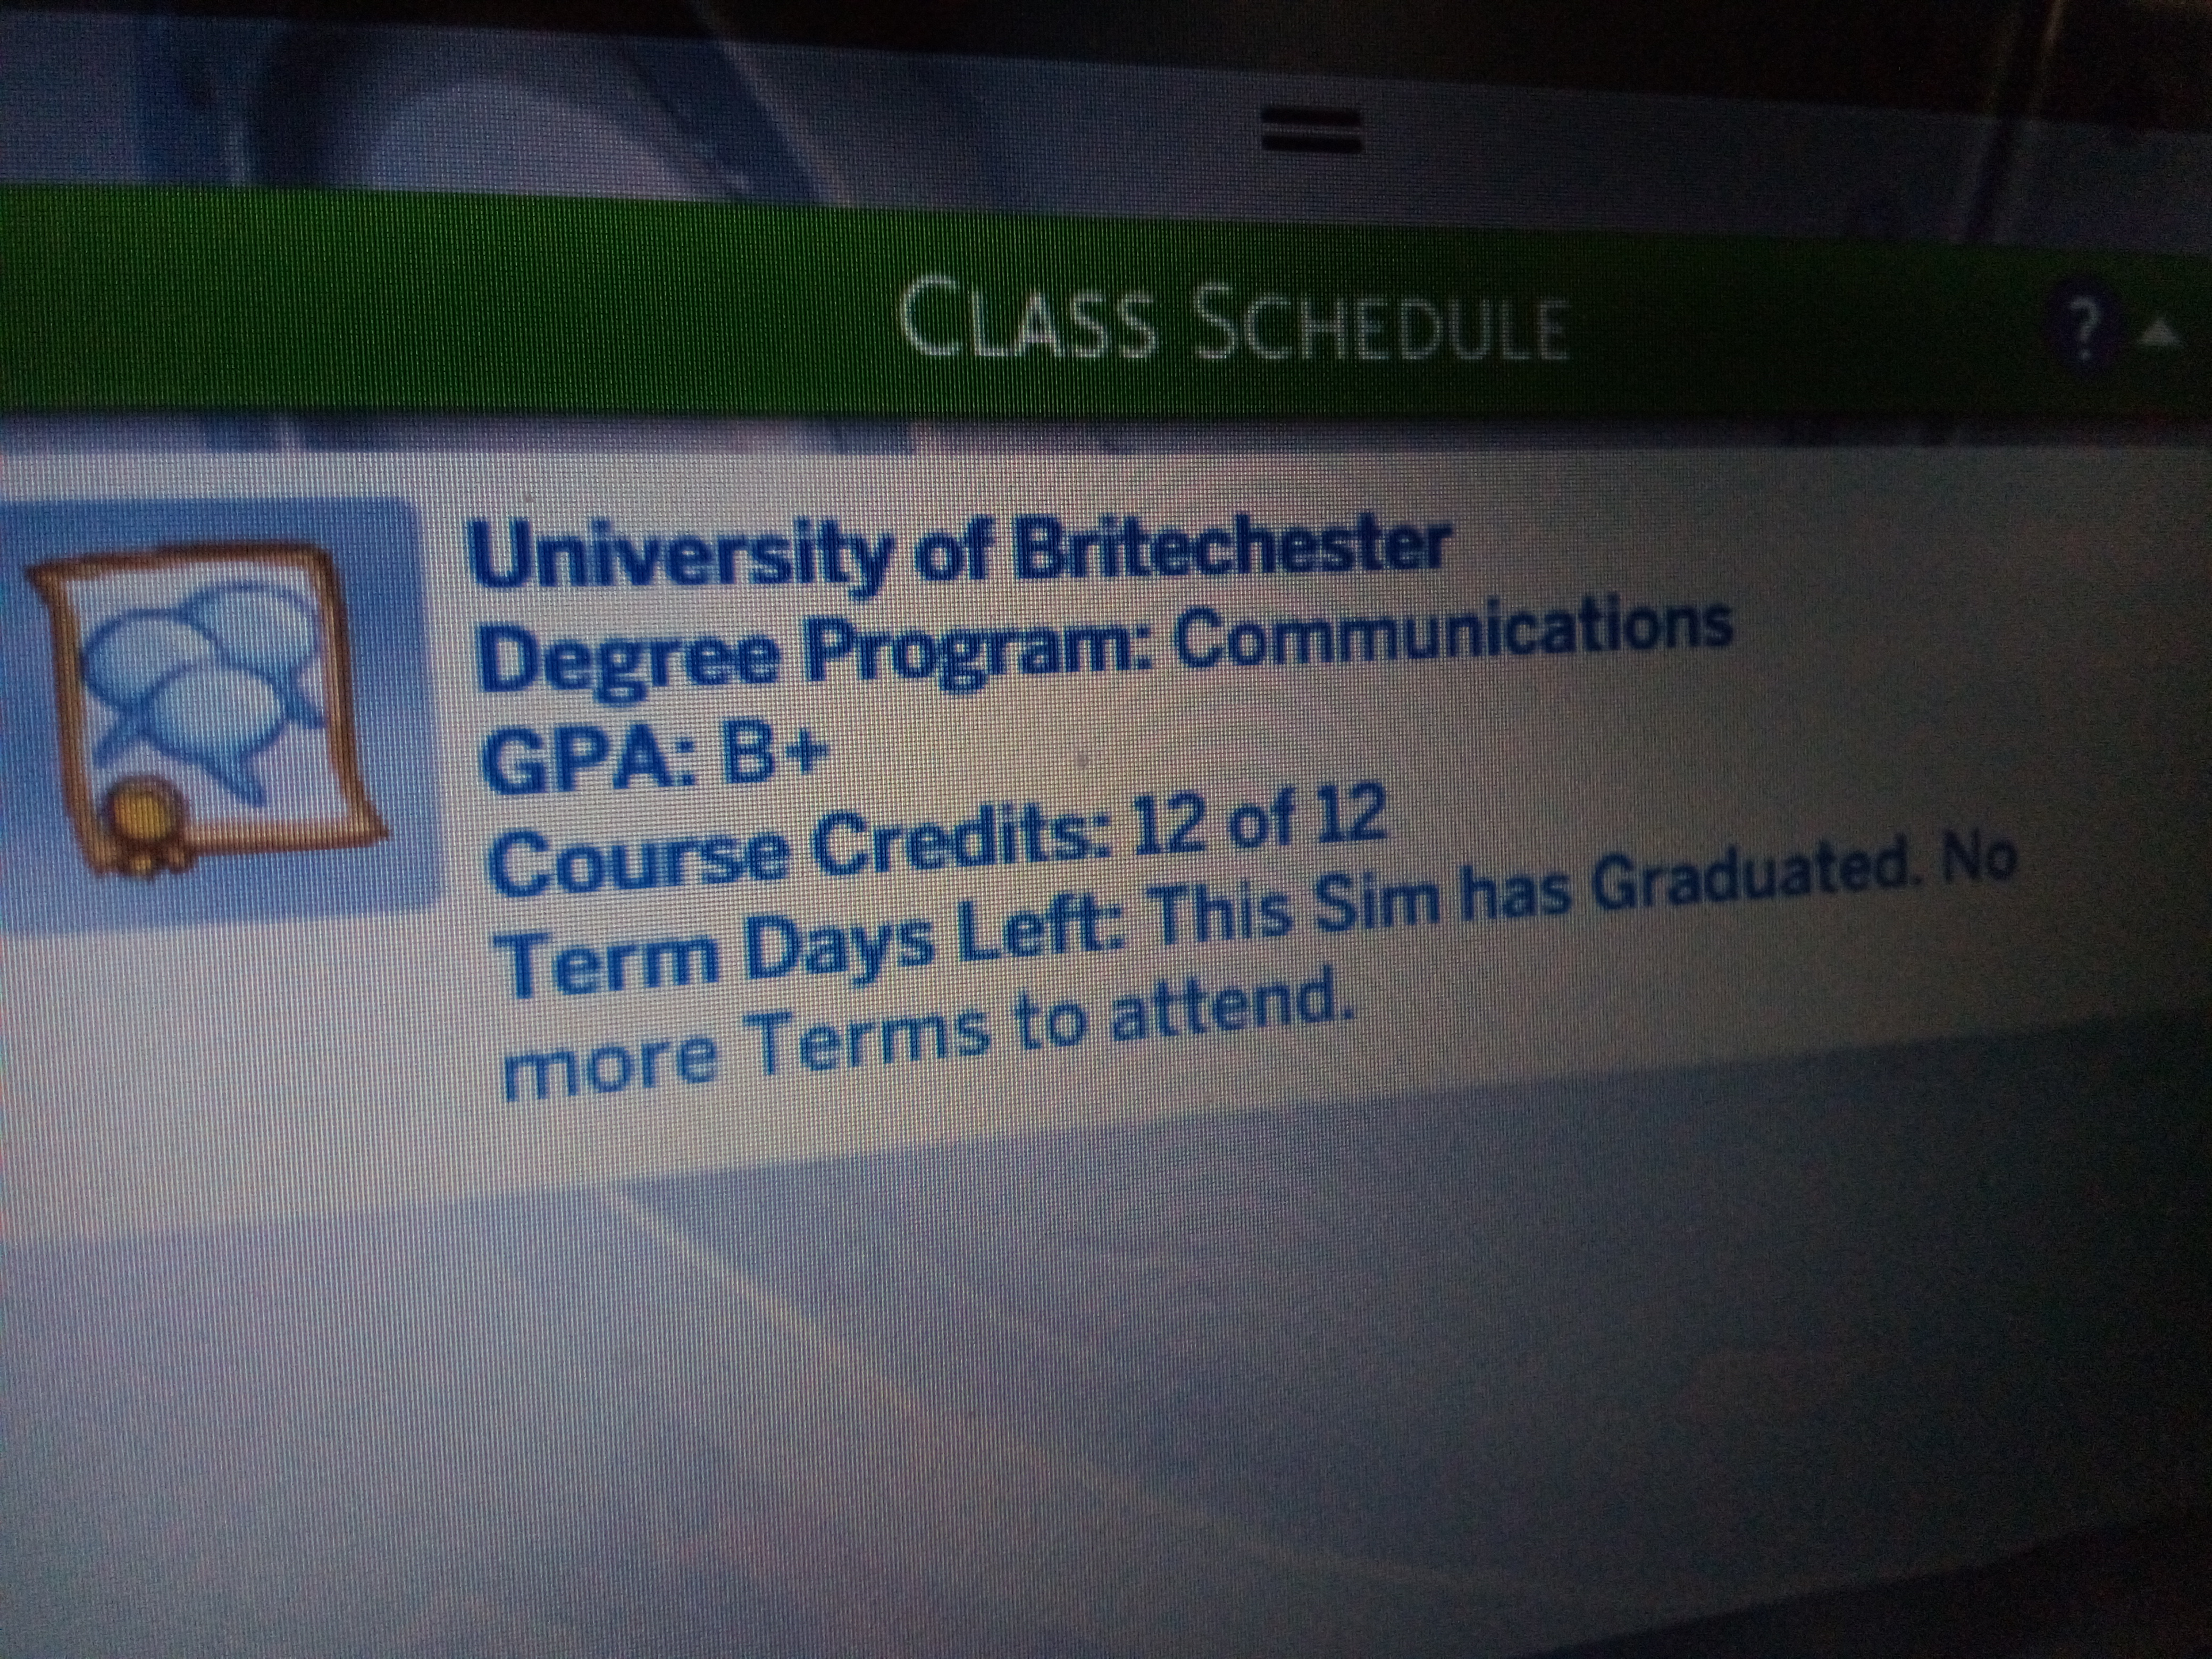 The Sims 4 Discover University Cheats Graduation Degrees Skills Careers